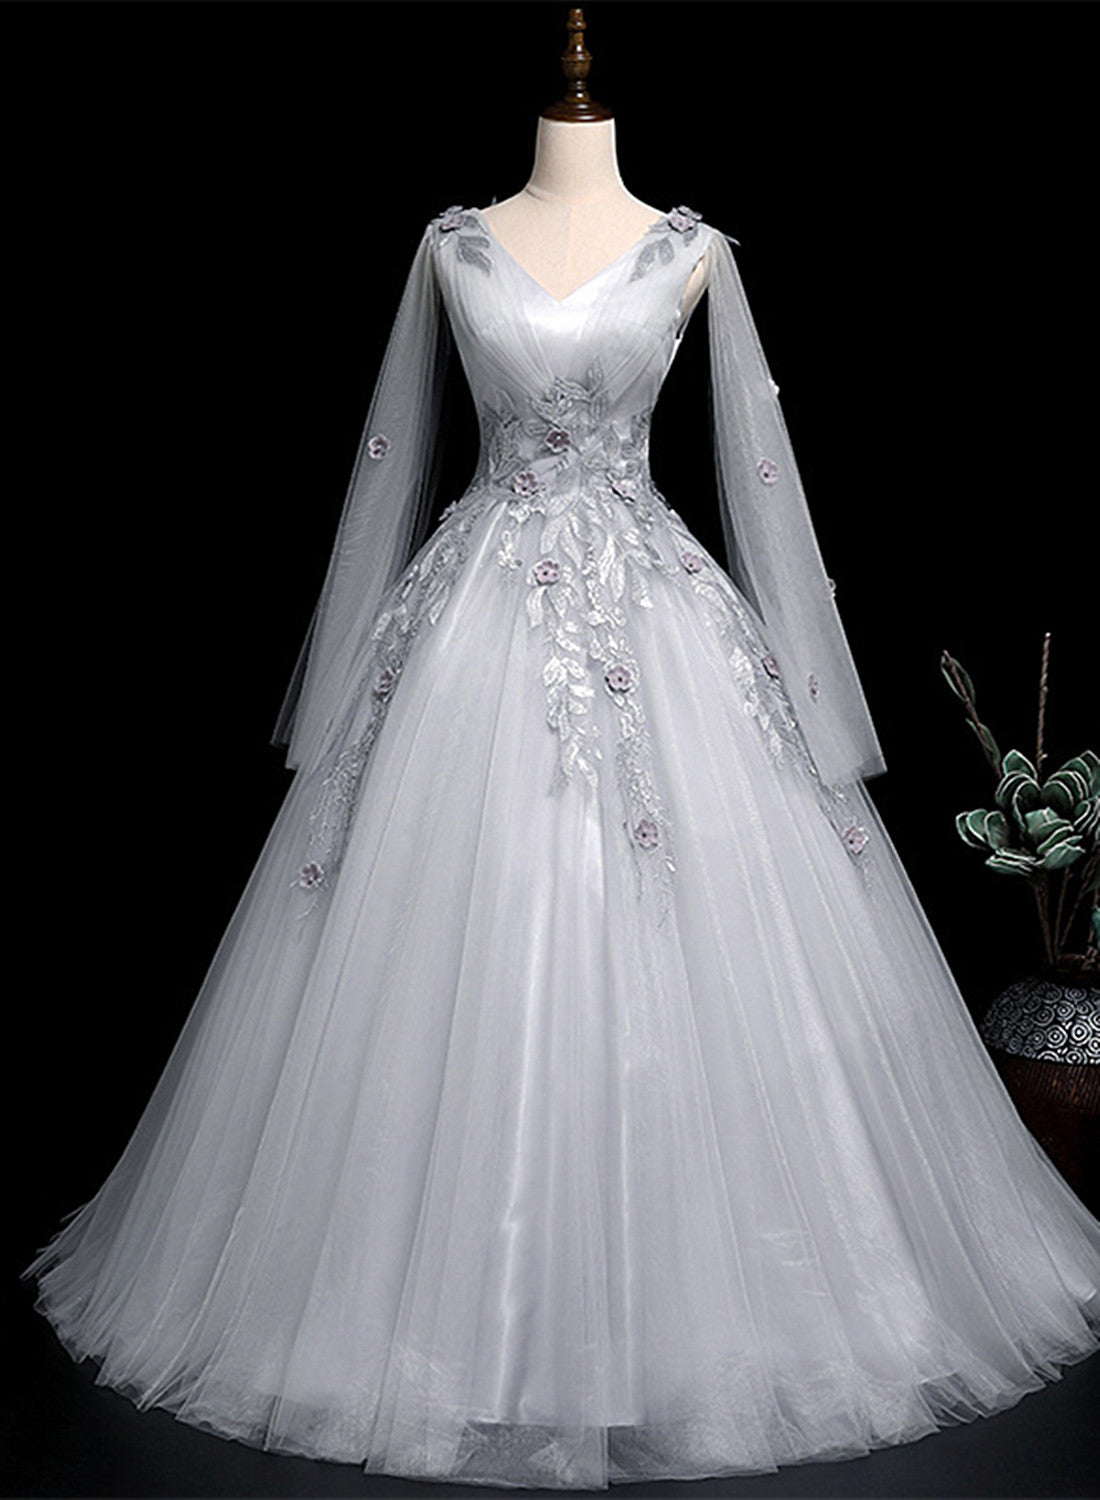 On Piece Dress, Grey V-neckline Ball Gown with Lace and Flowers Party Dress, Grey Sweet 16 Dress